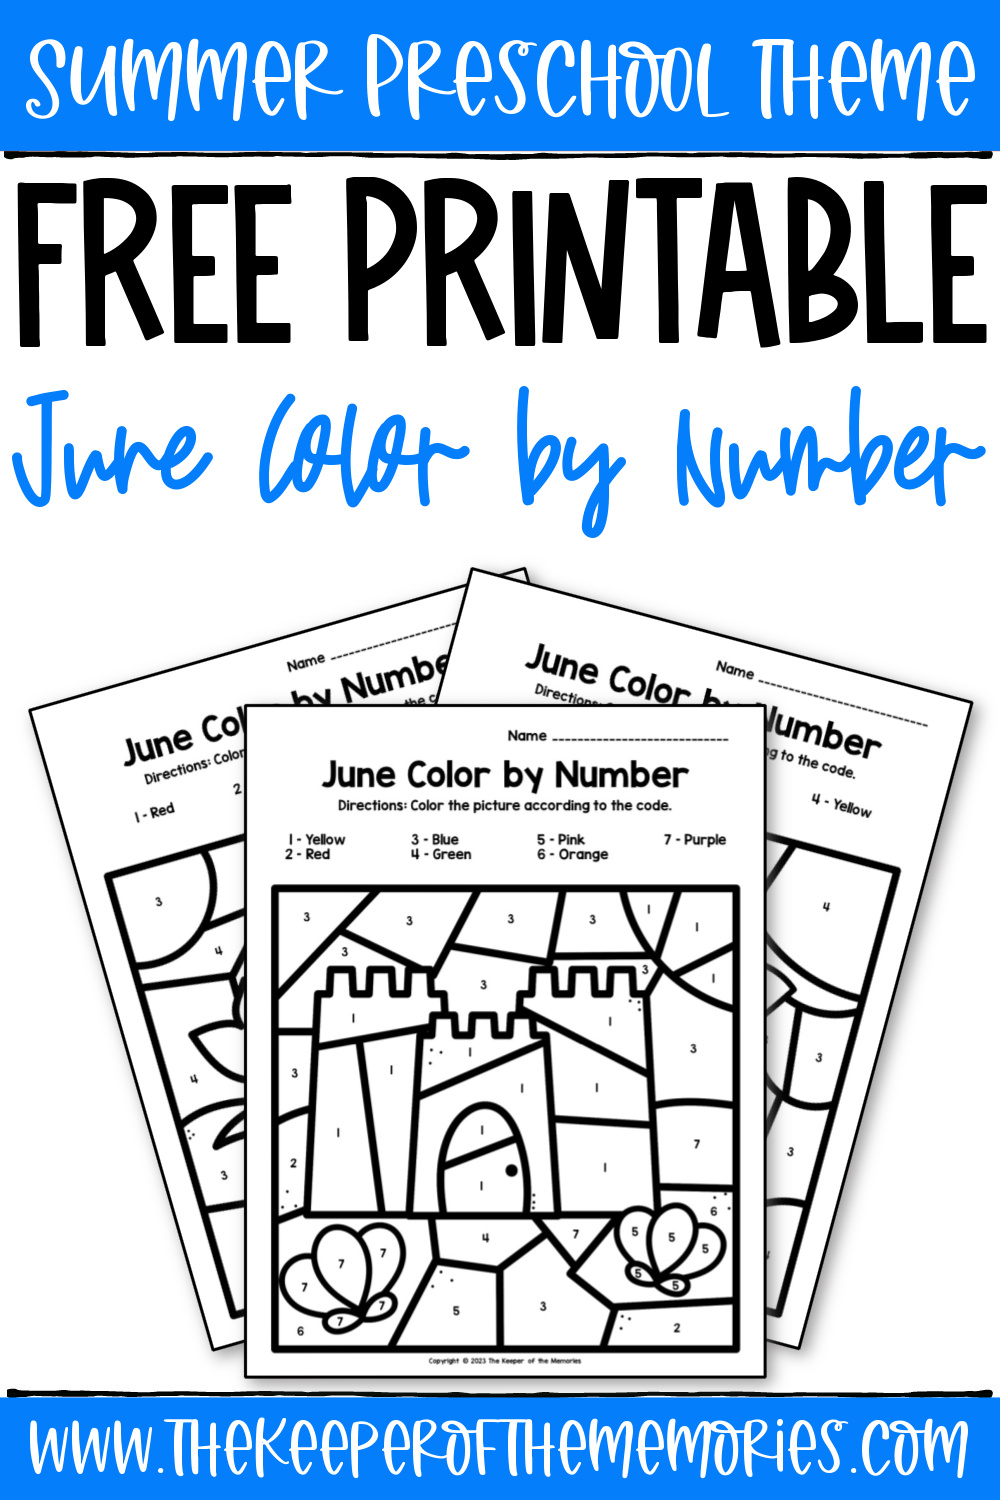 Free printable june color by number